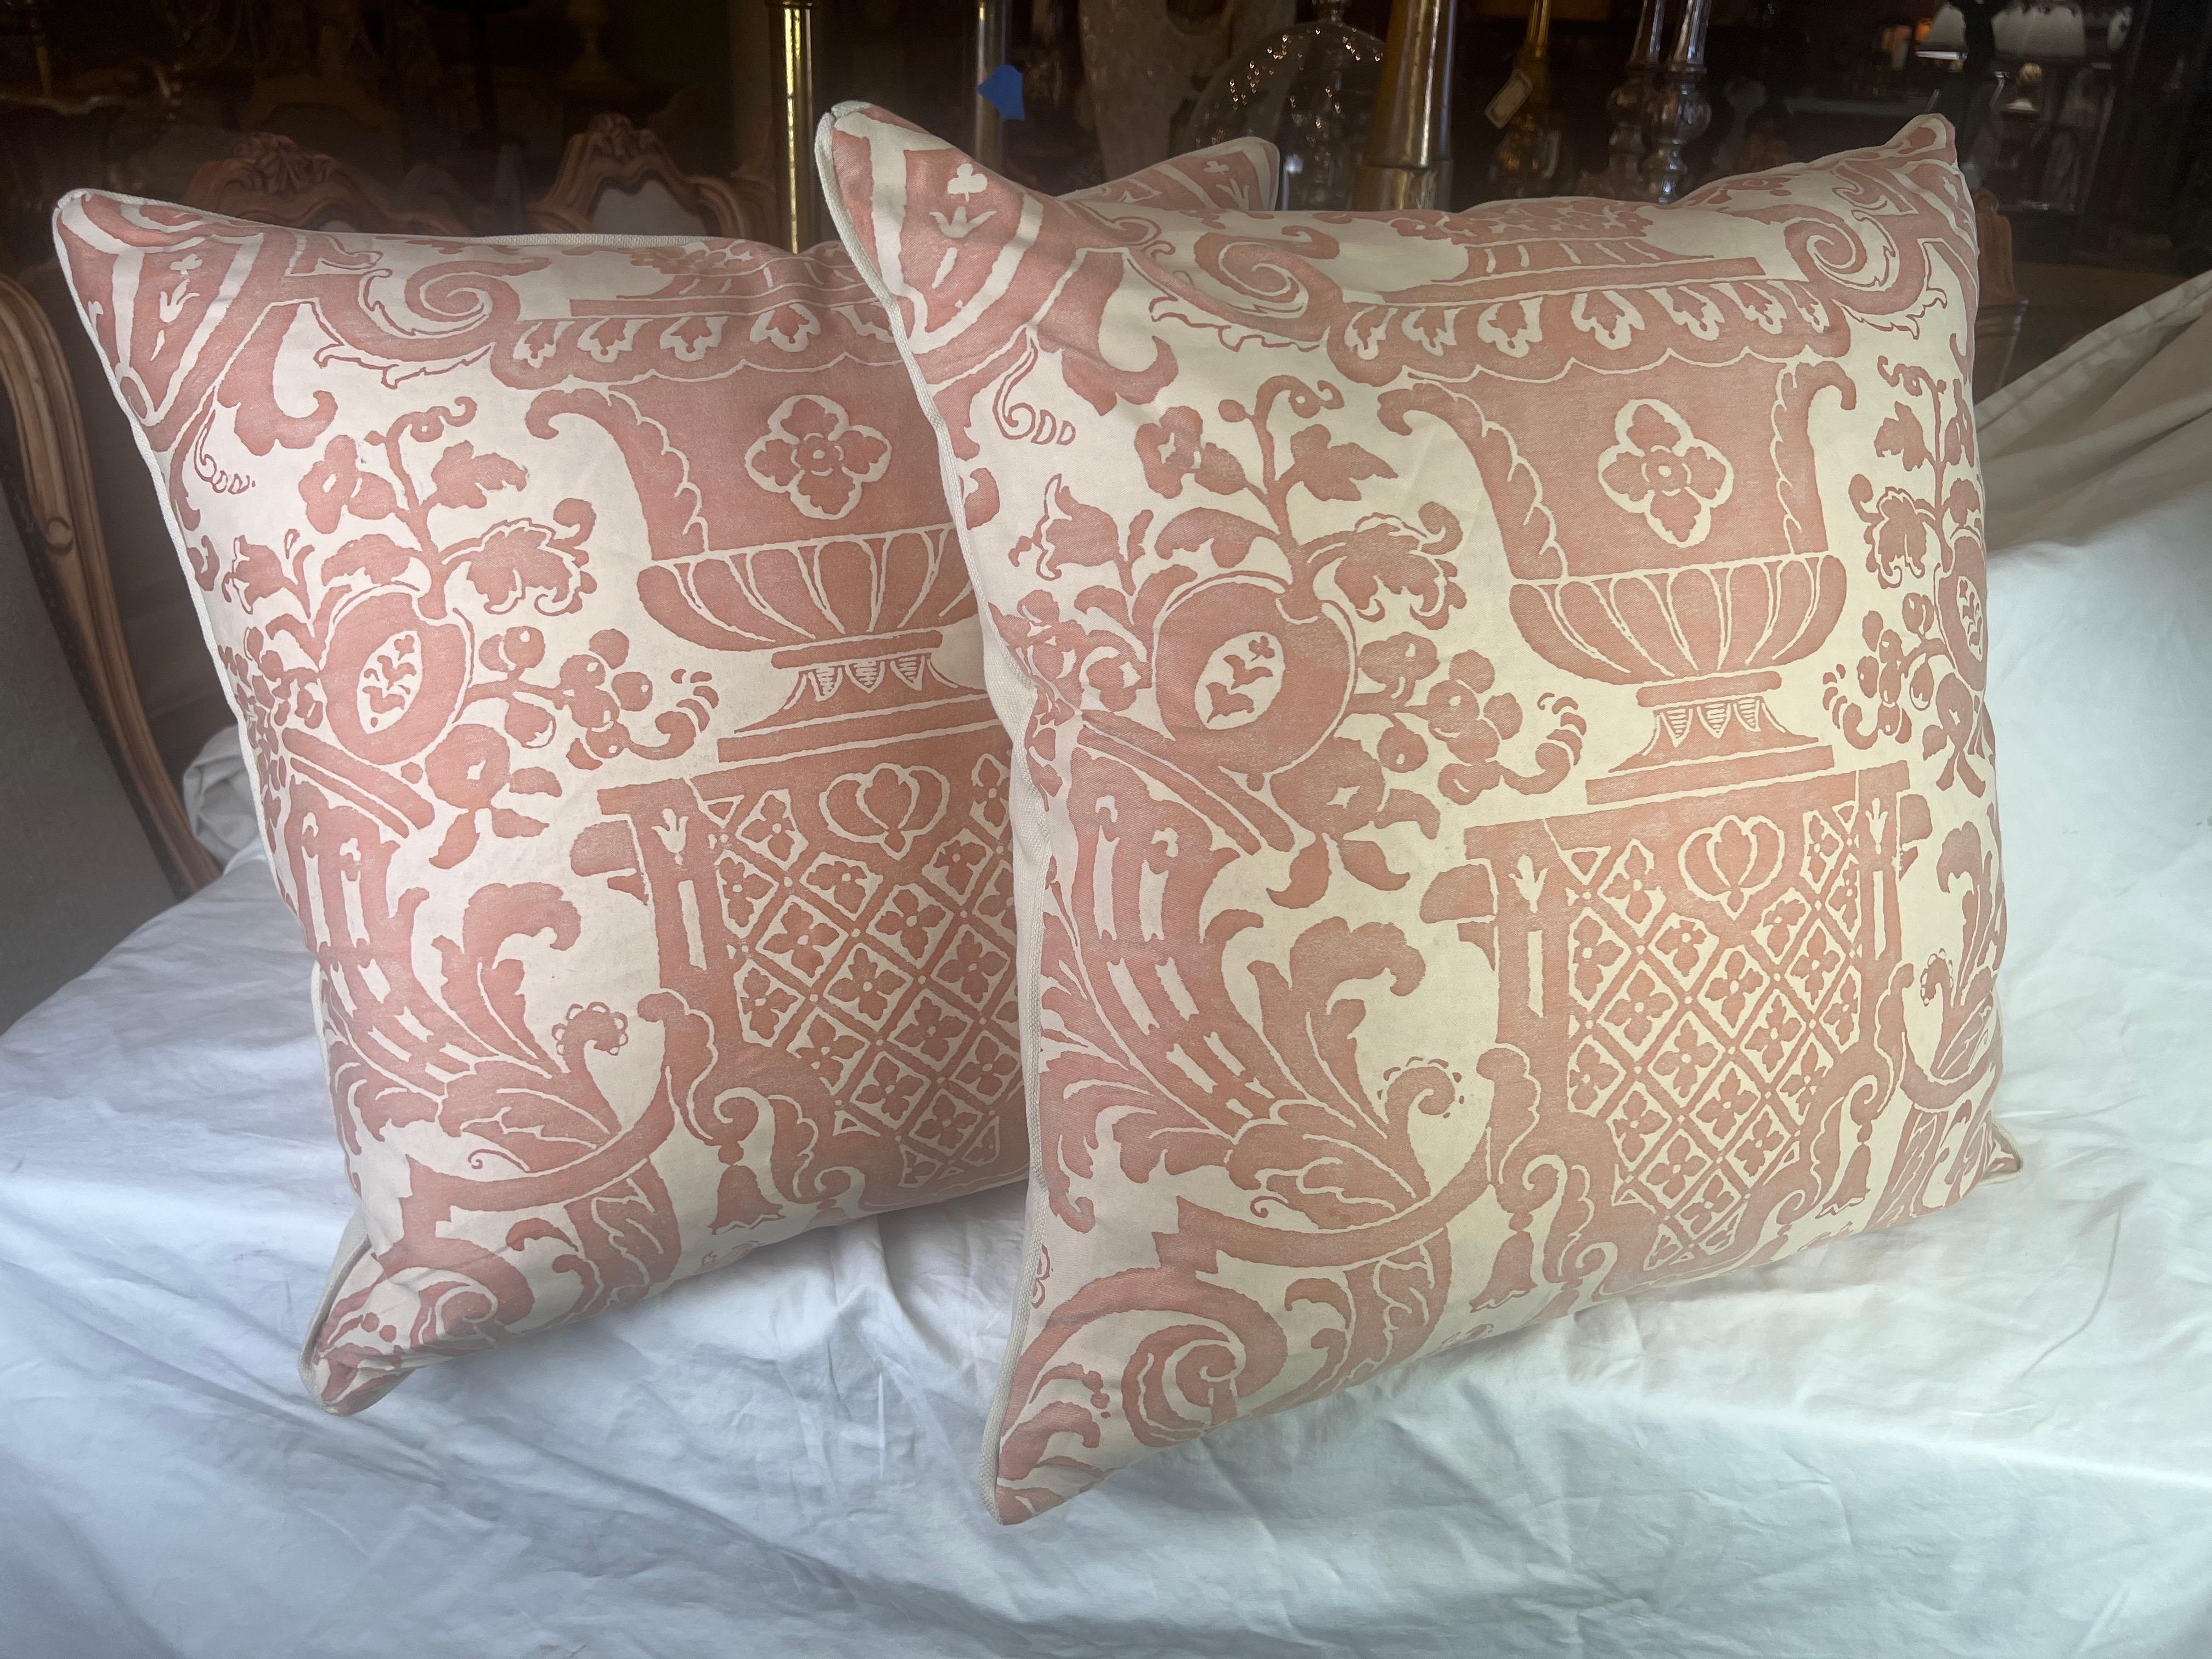 Pair of custom Carnavalet patterned Fortuny textile pillows in pink & cream. The 17th Century inspired French design-with magnificent and intricate garden urns abundant with flowers-is framed by lavish cornucopia & elaborate scrolling swags.